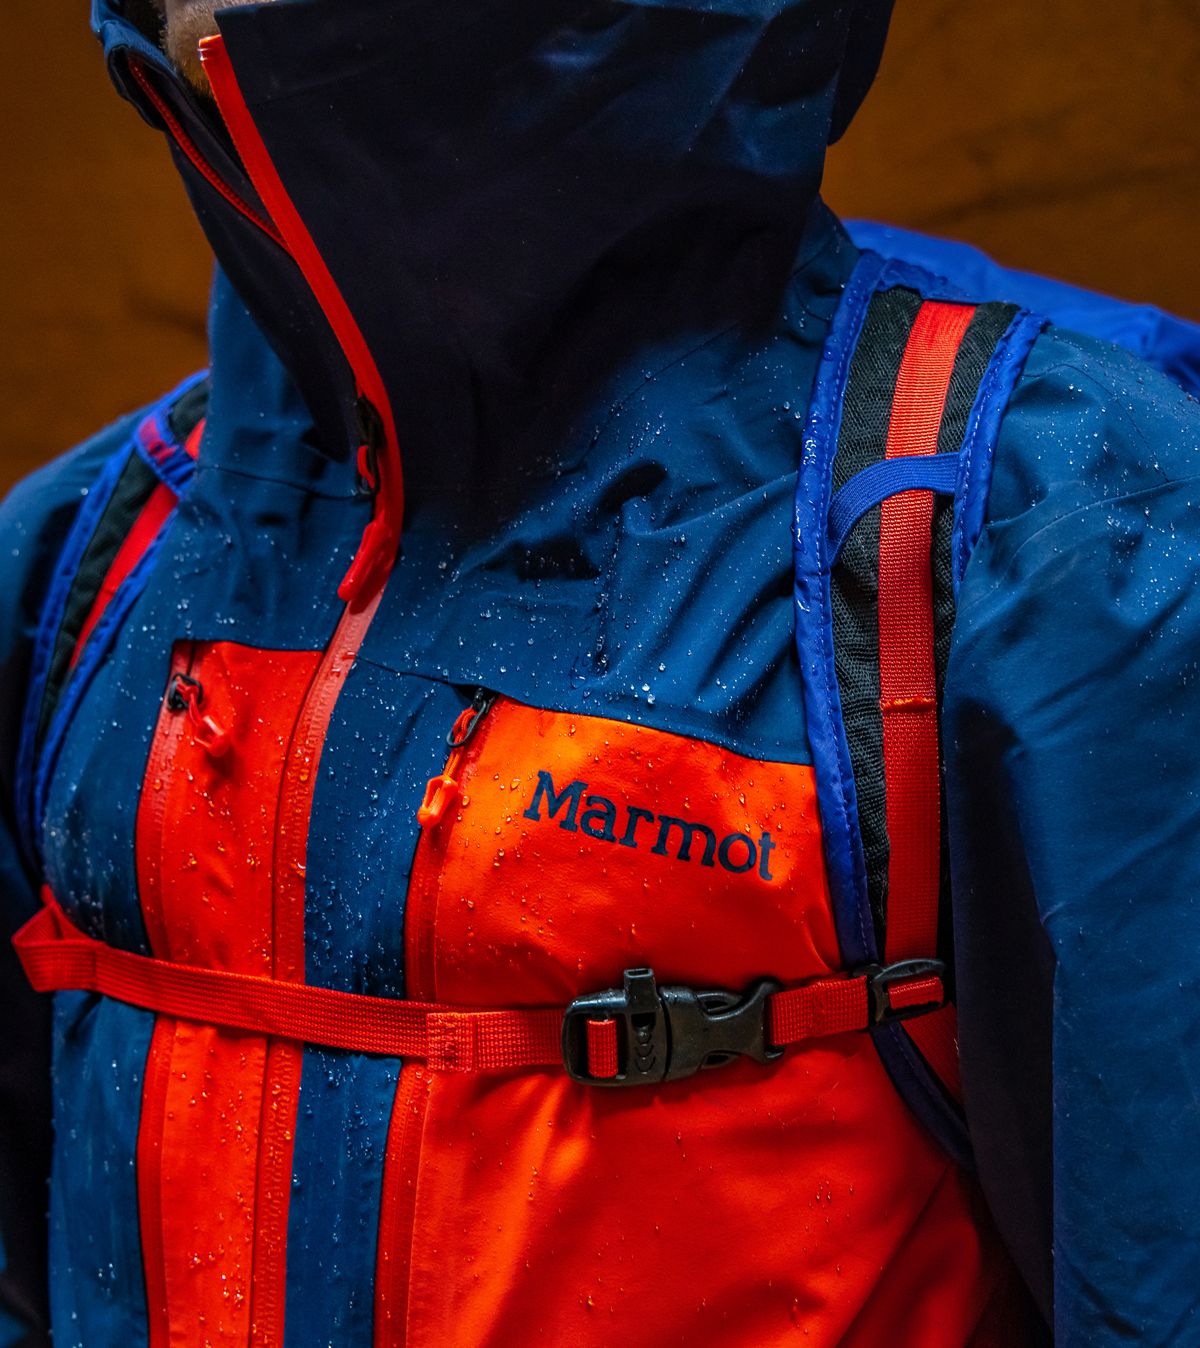 chest view of wet blue and orange rain jacket